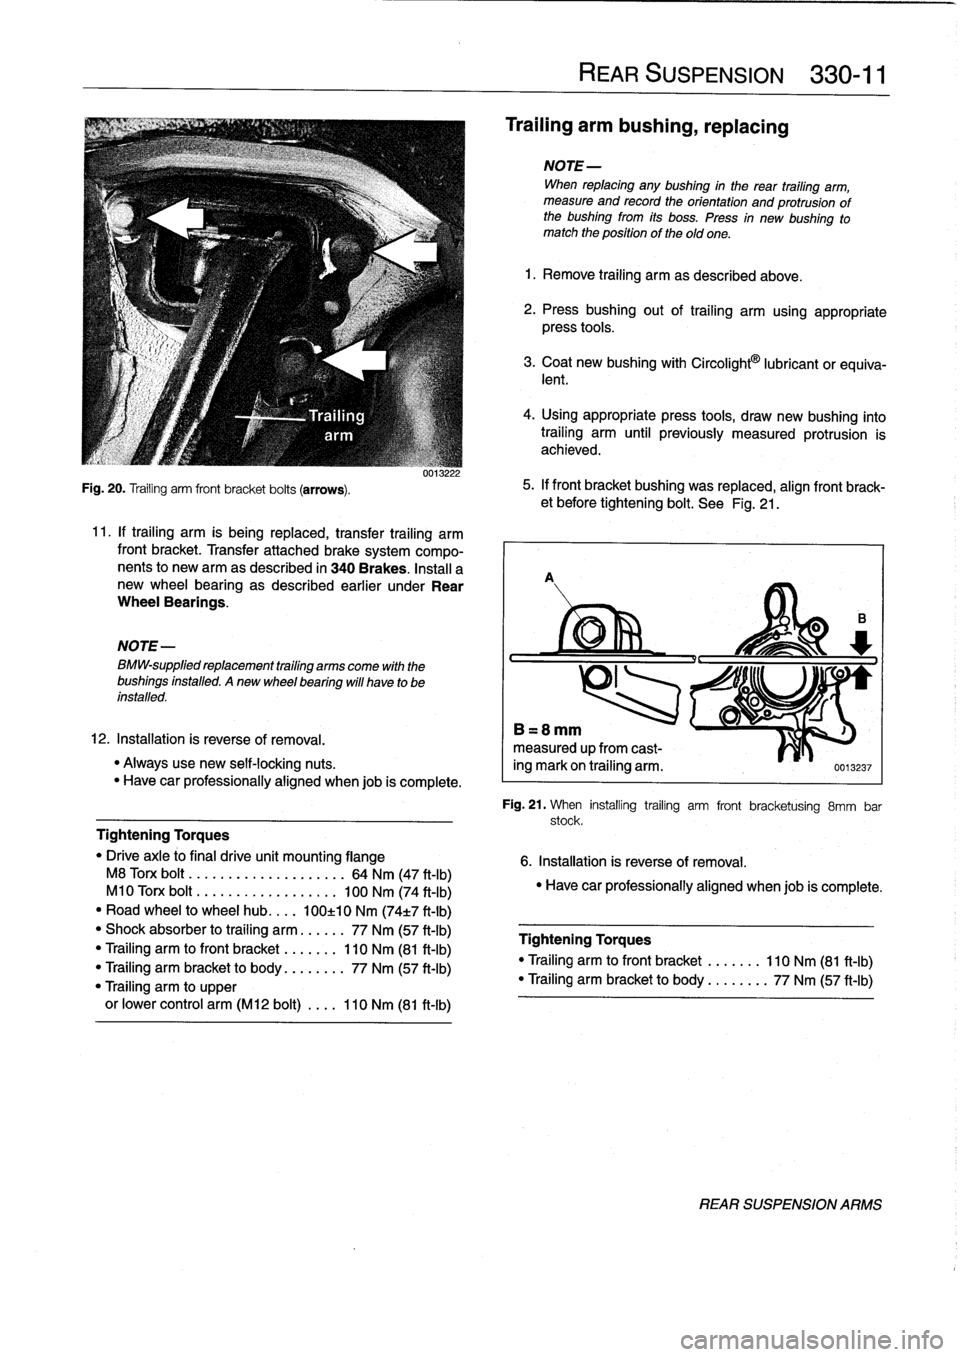 BMW M3 1993 E36 Owners Guide 
Fig
.
20
.
Trailing
arm
front
bracket
bolts
(arrows)
.

NOTE-

BMW-supplied
replacement
trailing
arms
come
with
the
bushings
installed
.
Anew
wheel
bearing
will
have
to
be
installed
.

0013222

11
.
